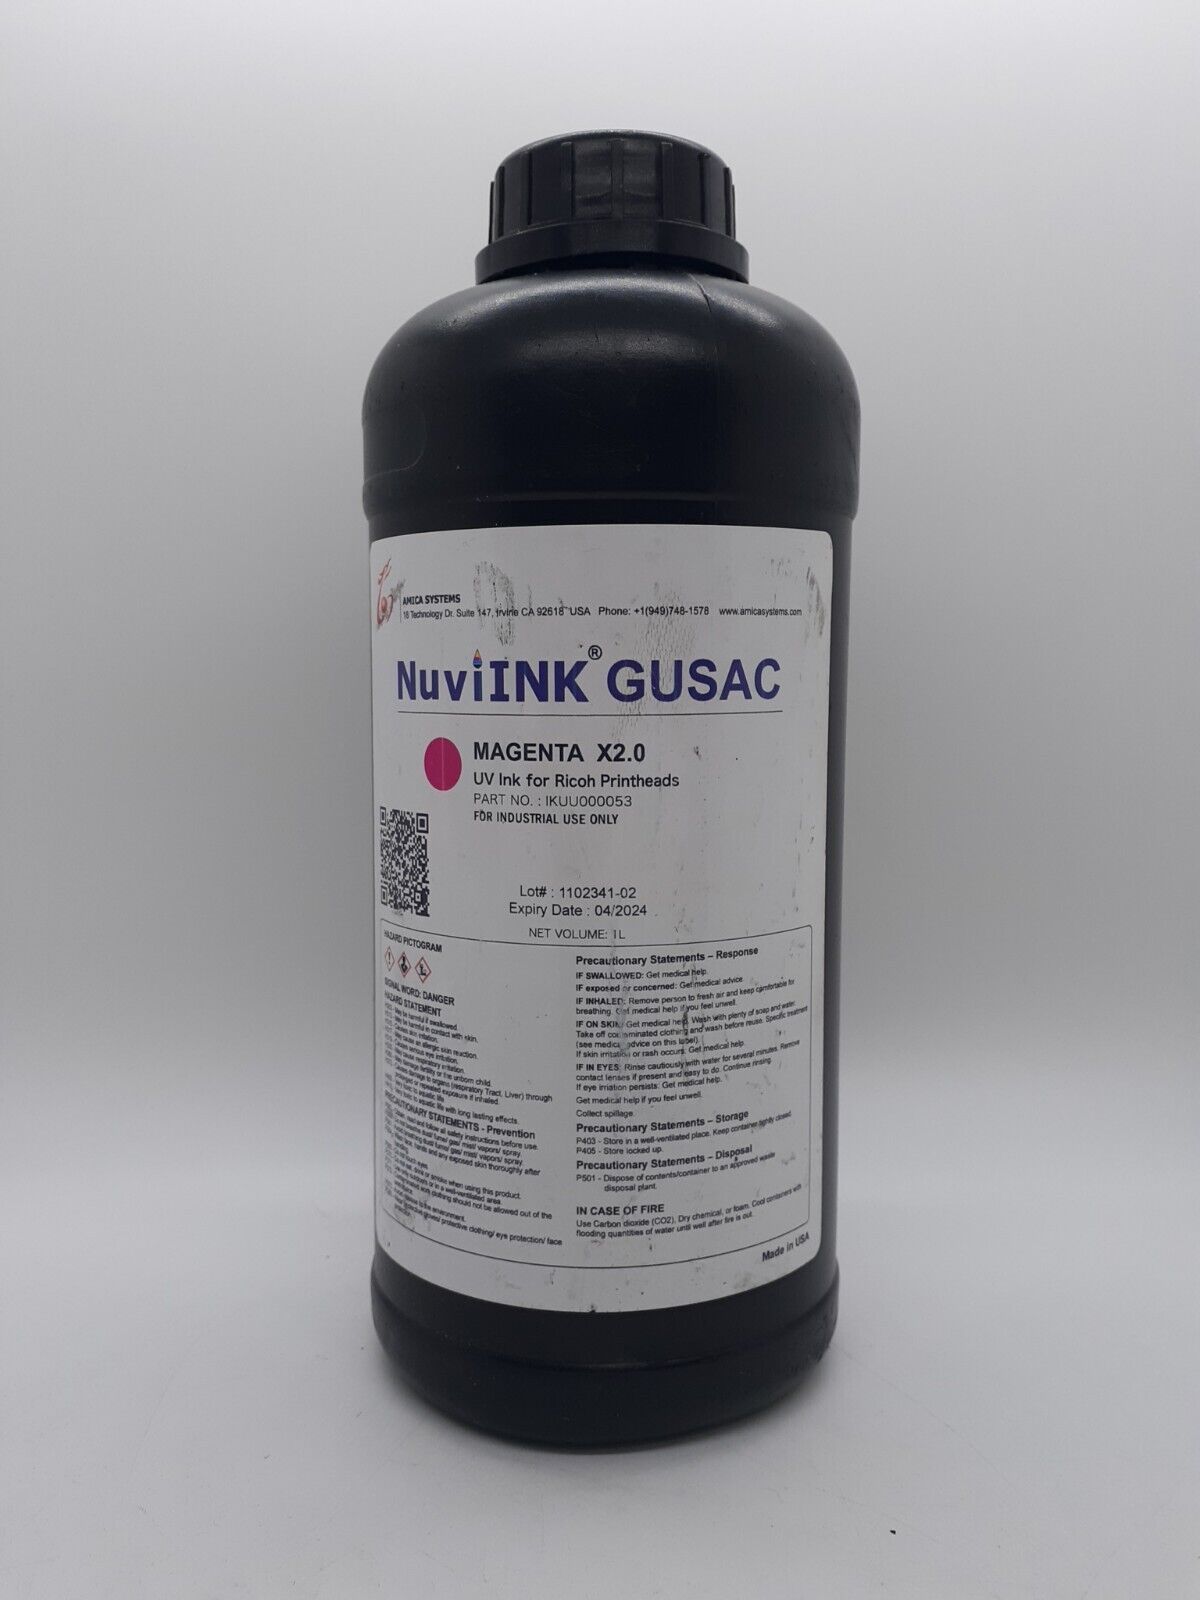 NuviInk Gusac Magenta X2.0 IV Ink For Ricoh Printheads - 1 Liter